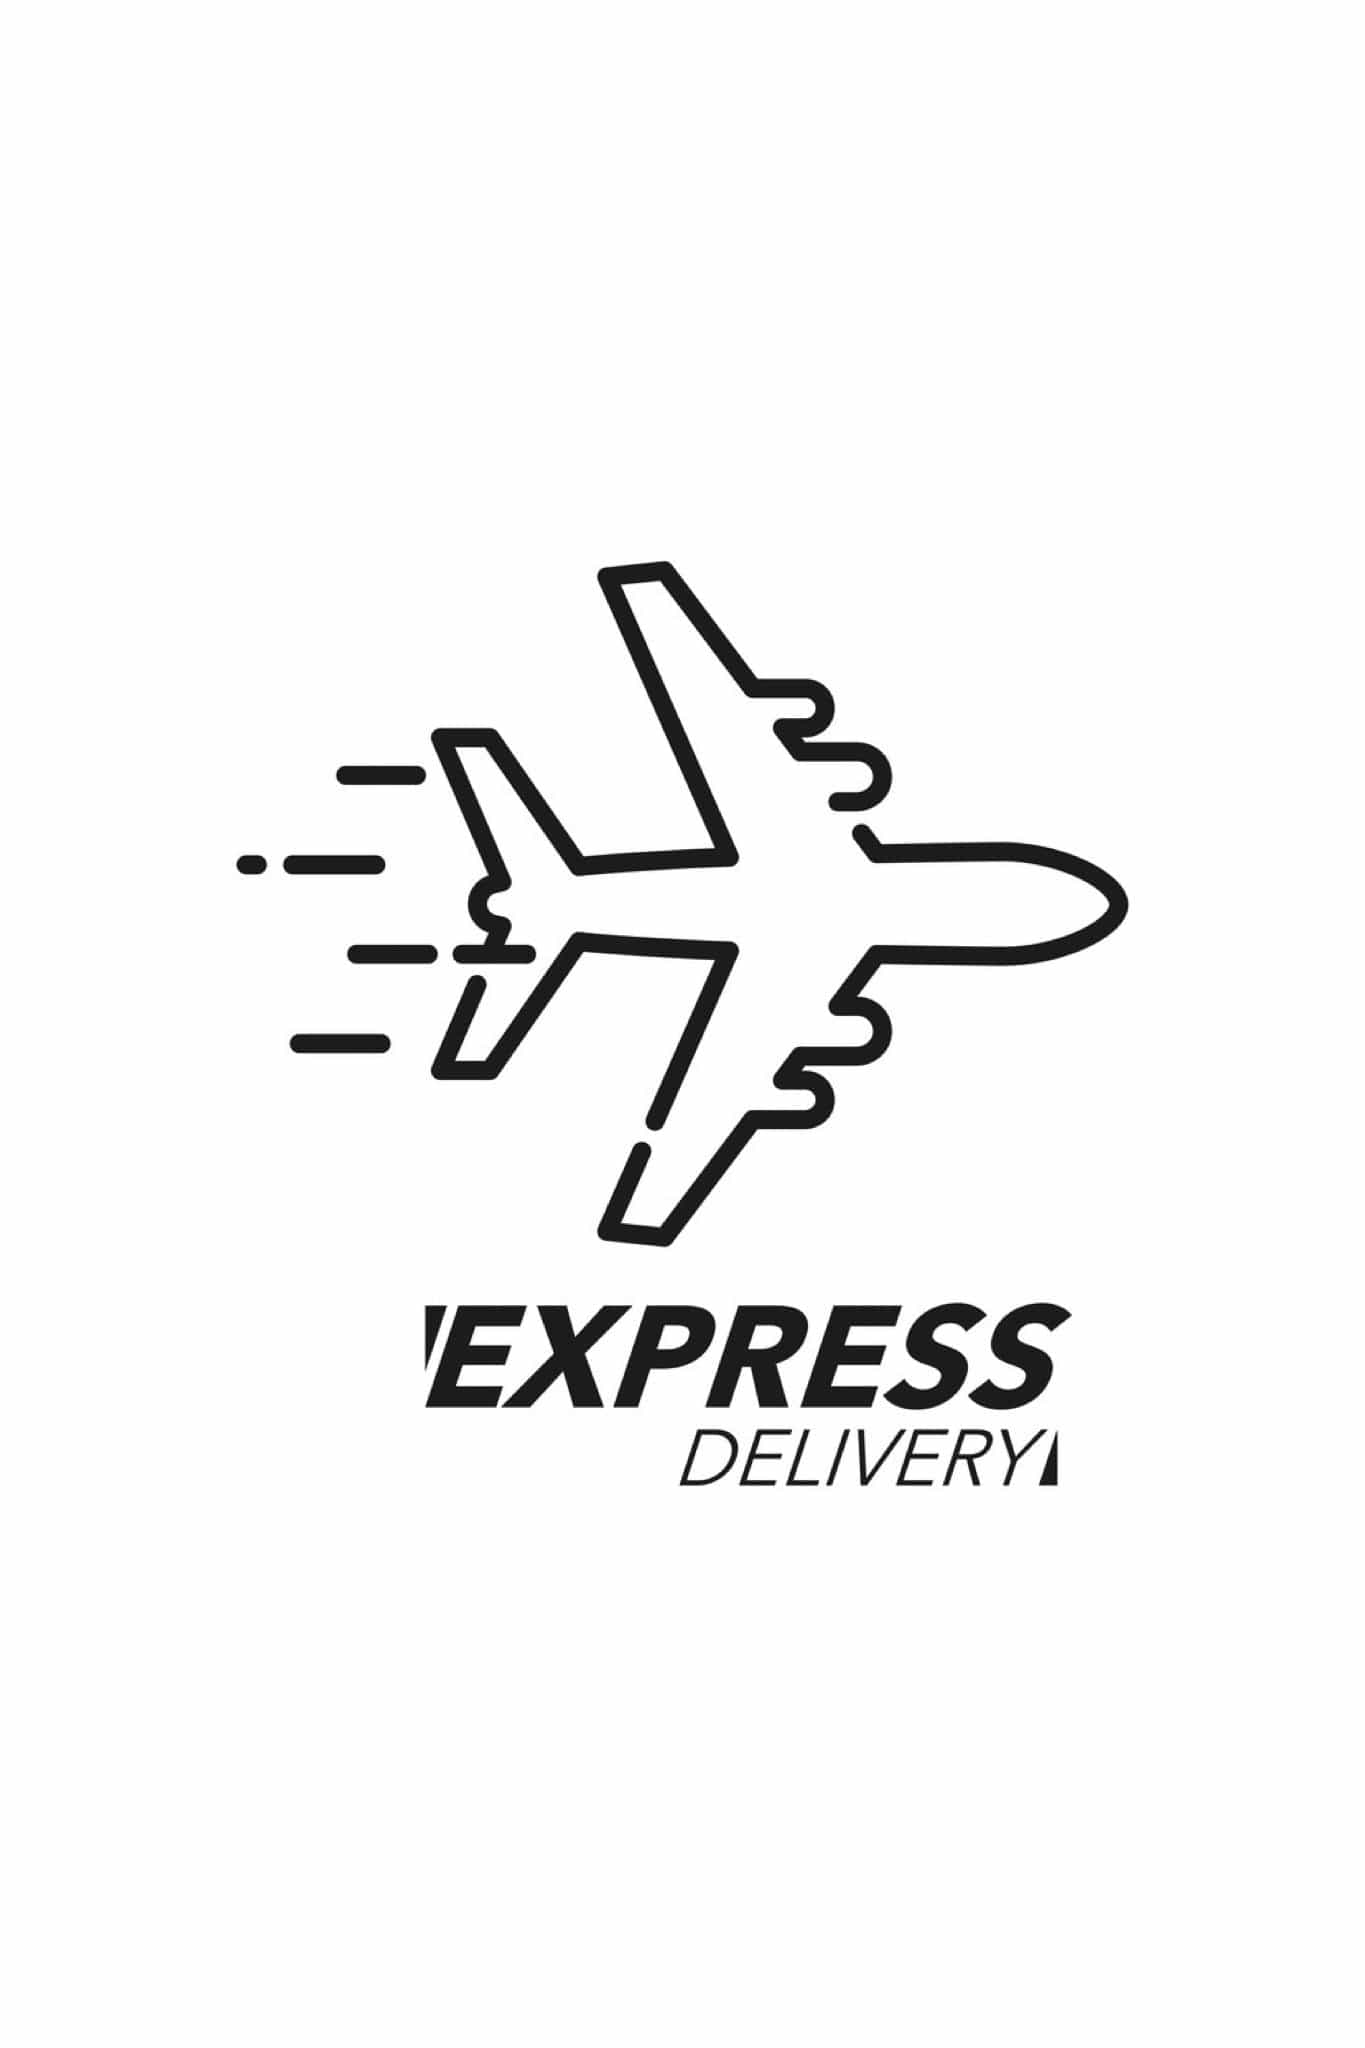 FedEx / DHL Express Shipping 3-5 Business days